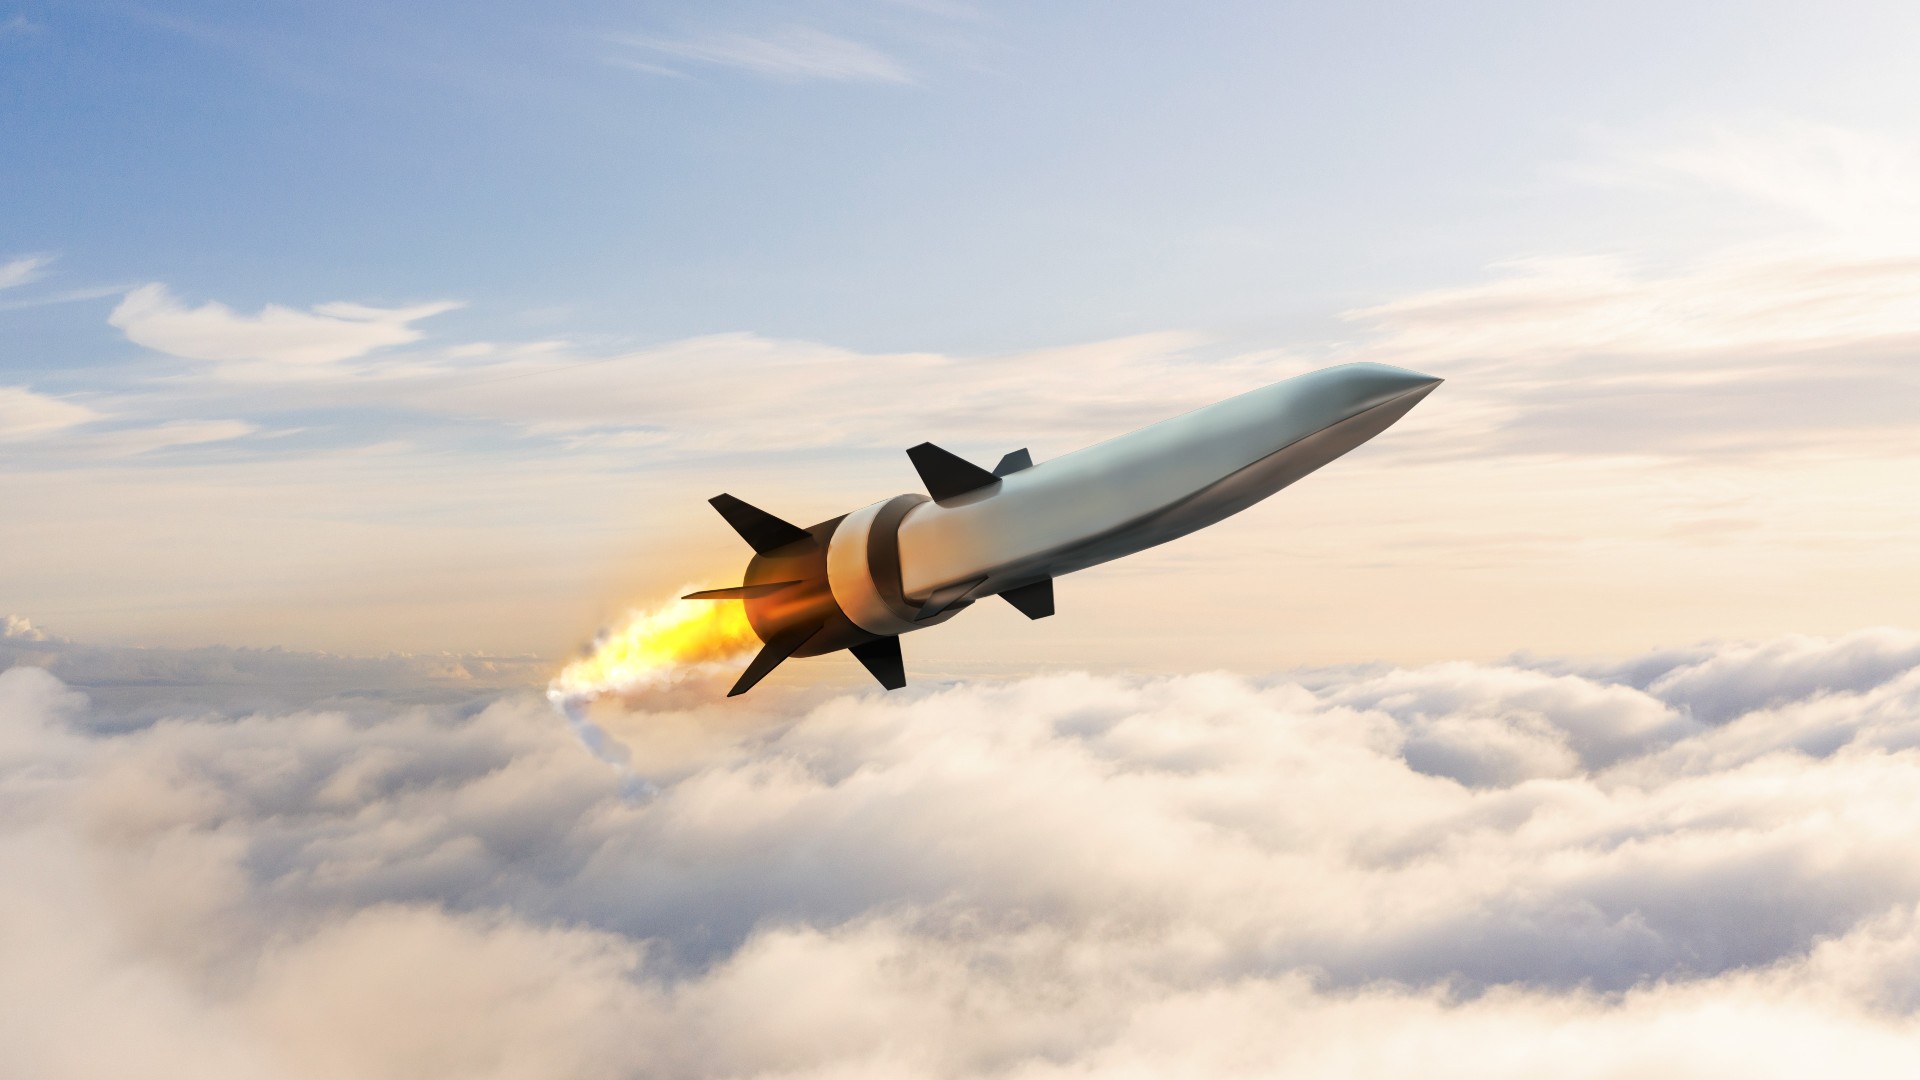 hypersonic weapon flying above clouds